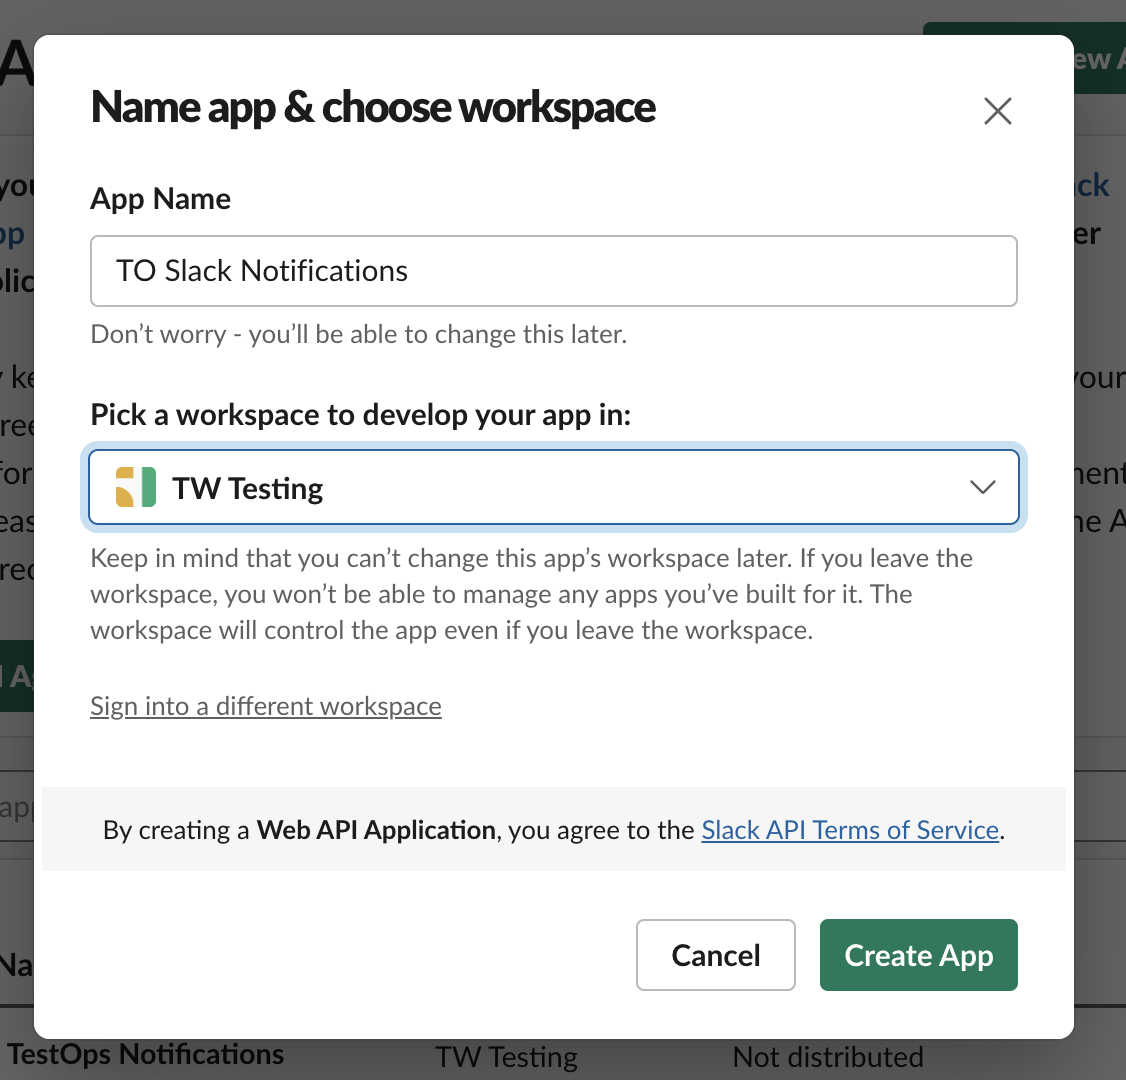 Name your app and workspace in Slack.